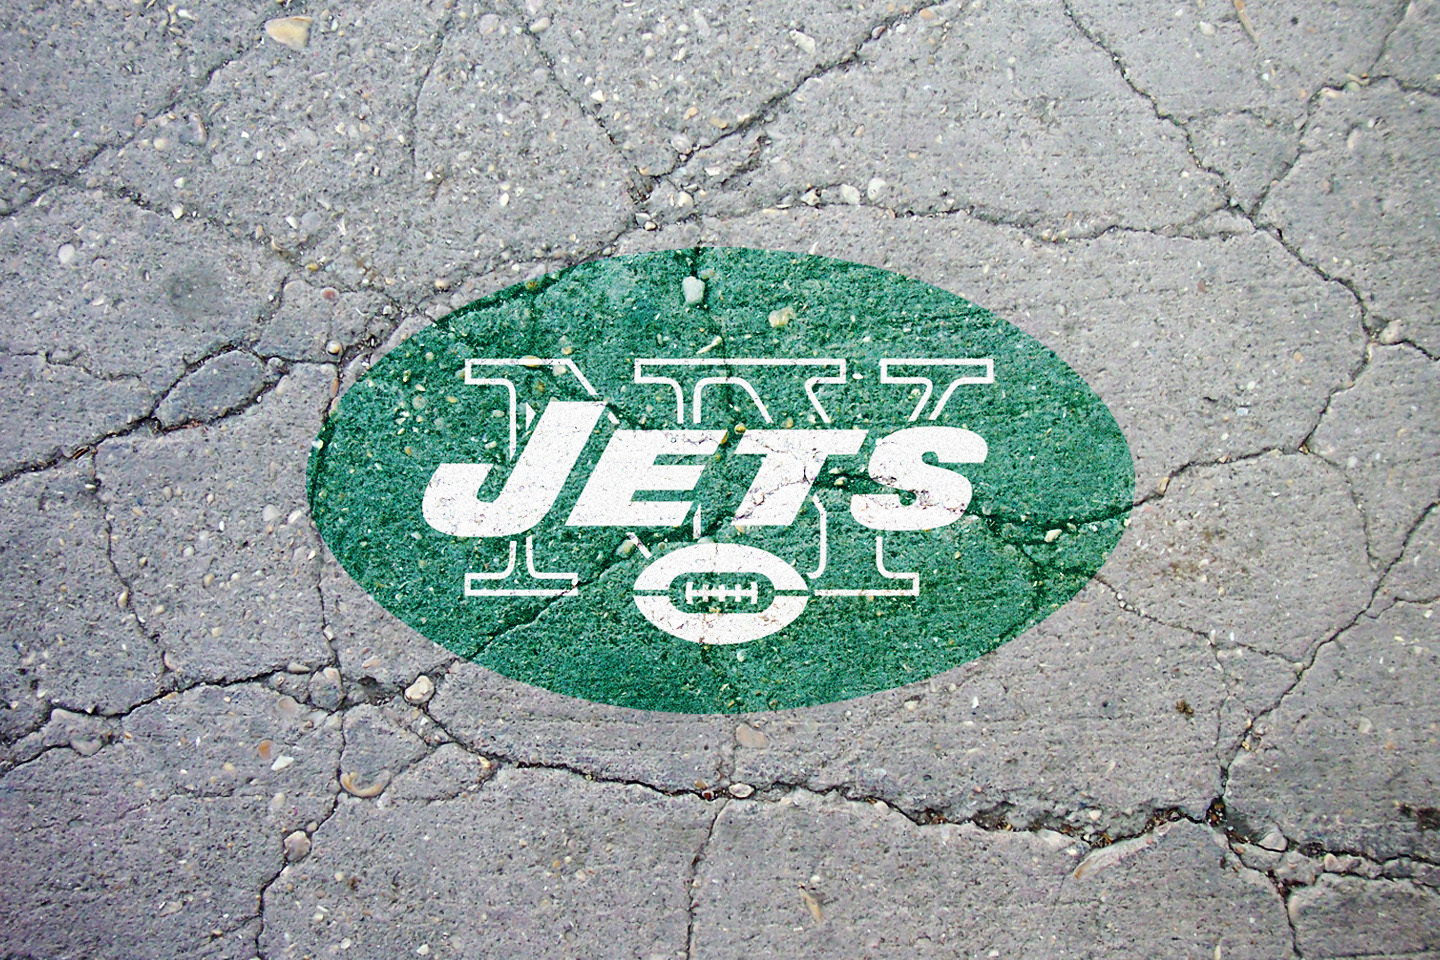 Some Sweet Wallpaper From The Team New York Jets For All You